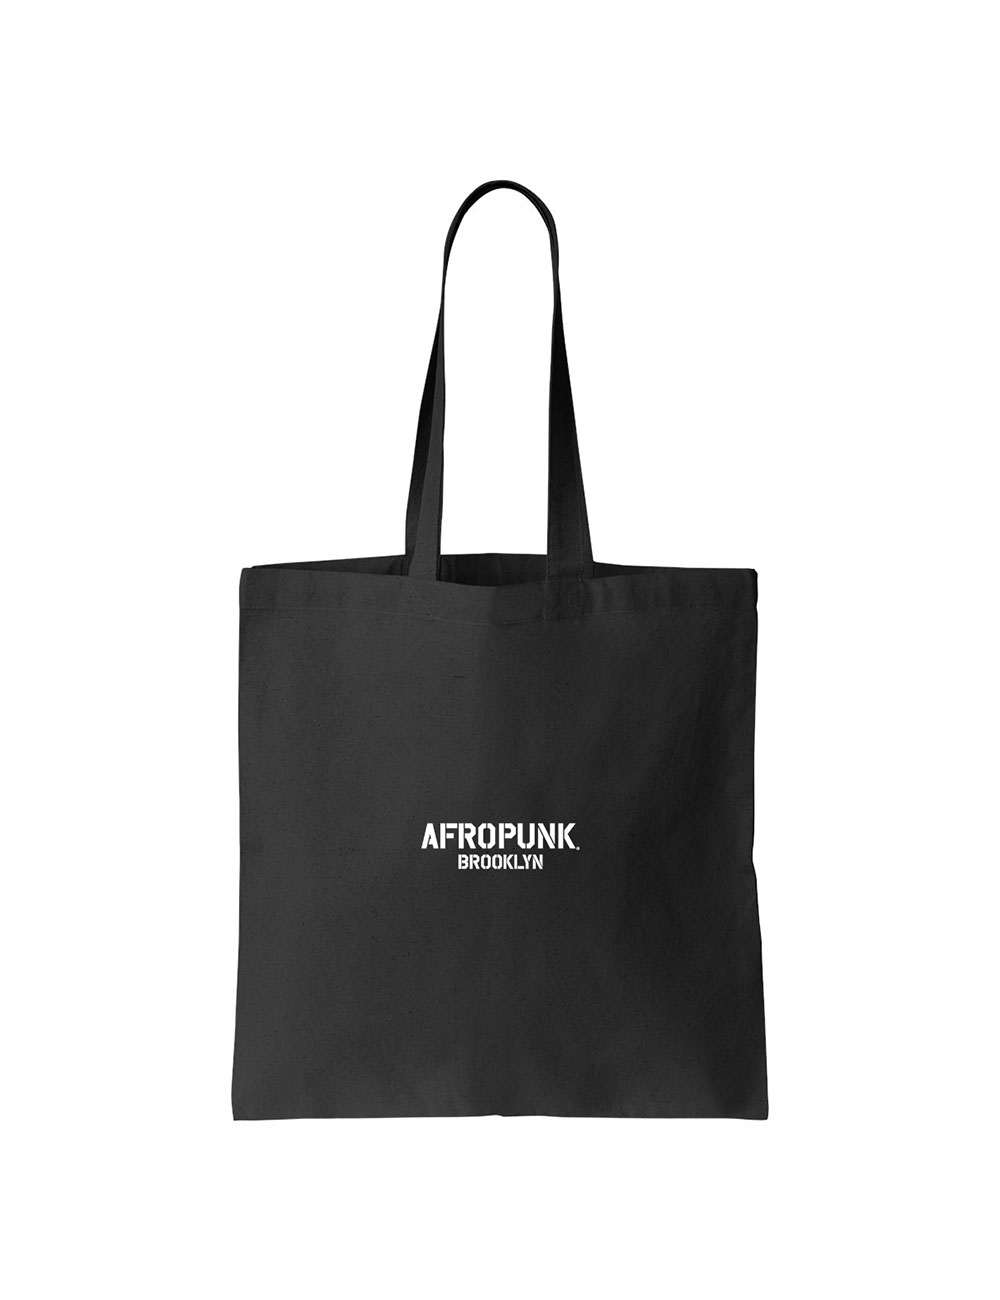 Afropunk - Official Merch Shop - T-Shirts - We See You Tote Back